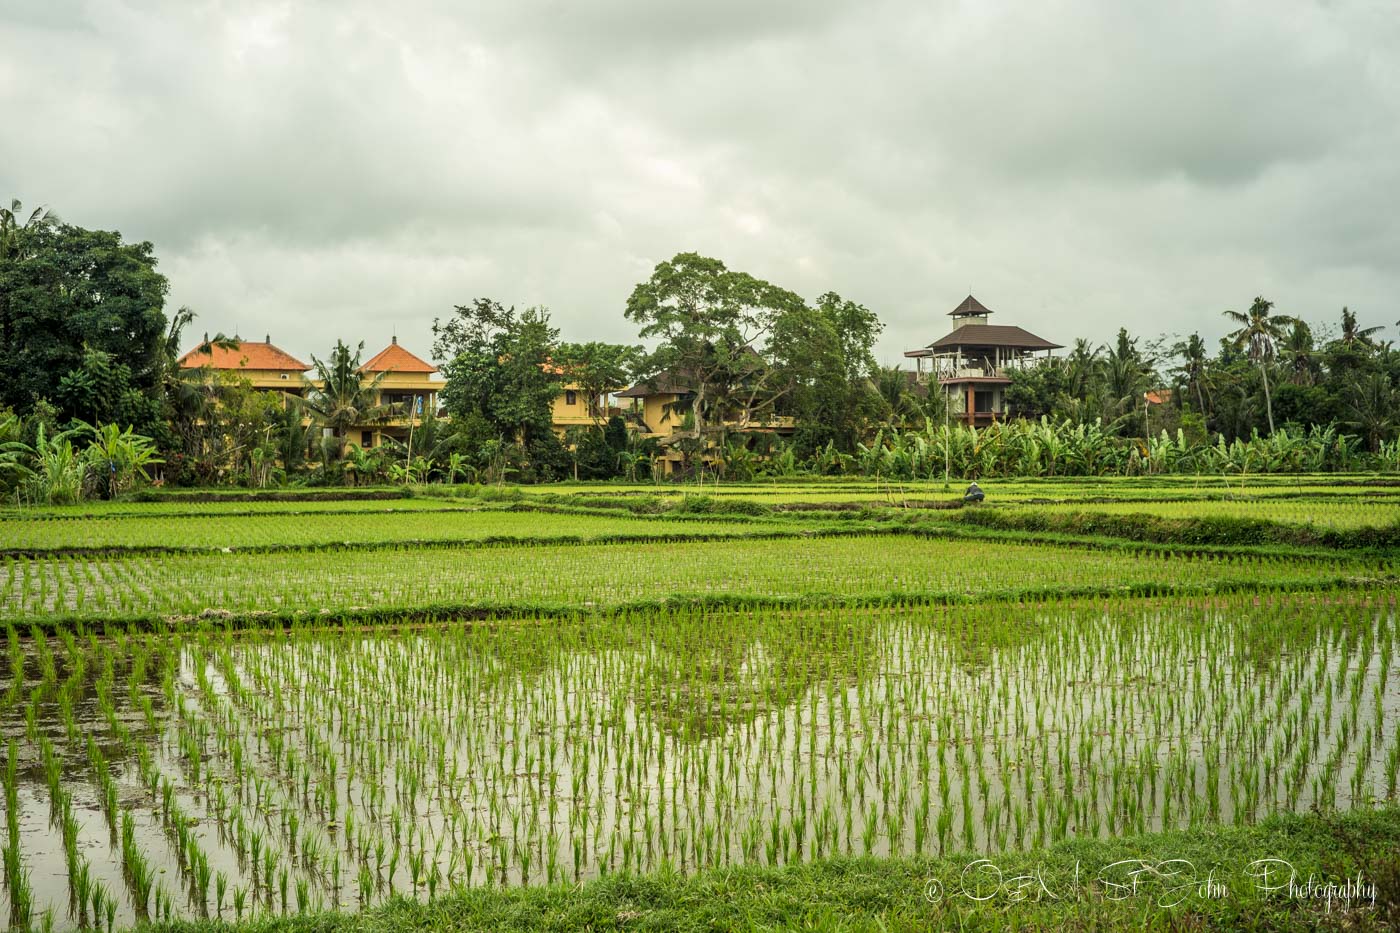 Sustainable Traveler's Guide to Top Things to do in Ubud, Bali